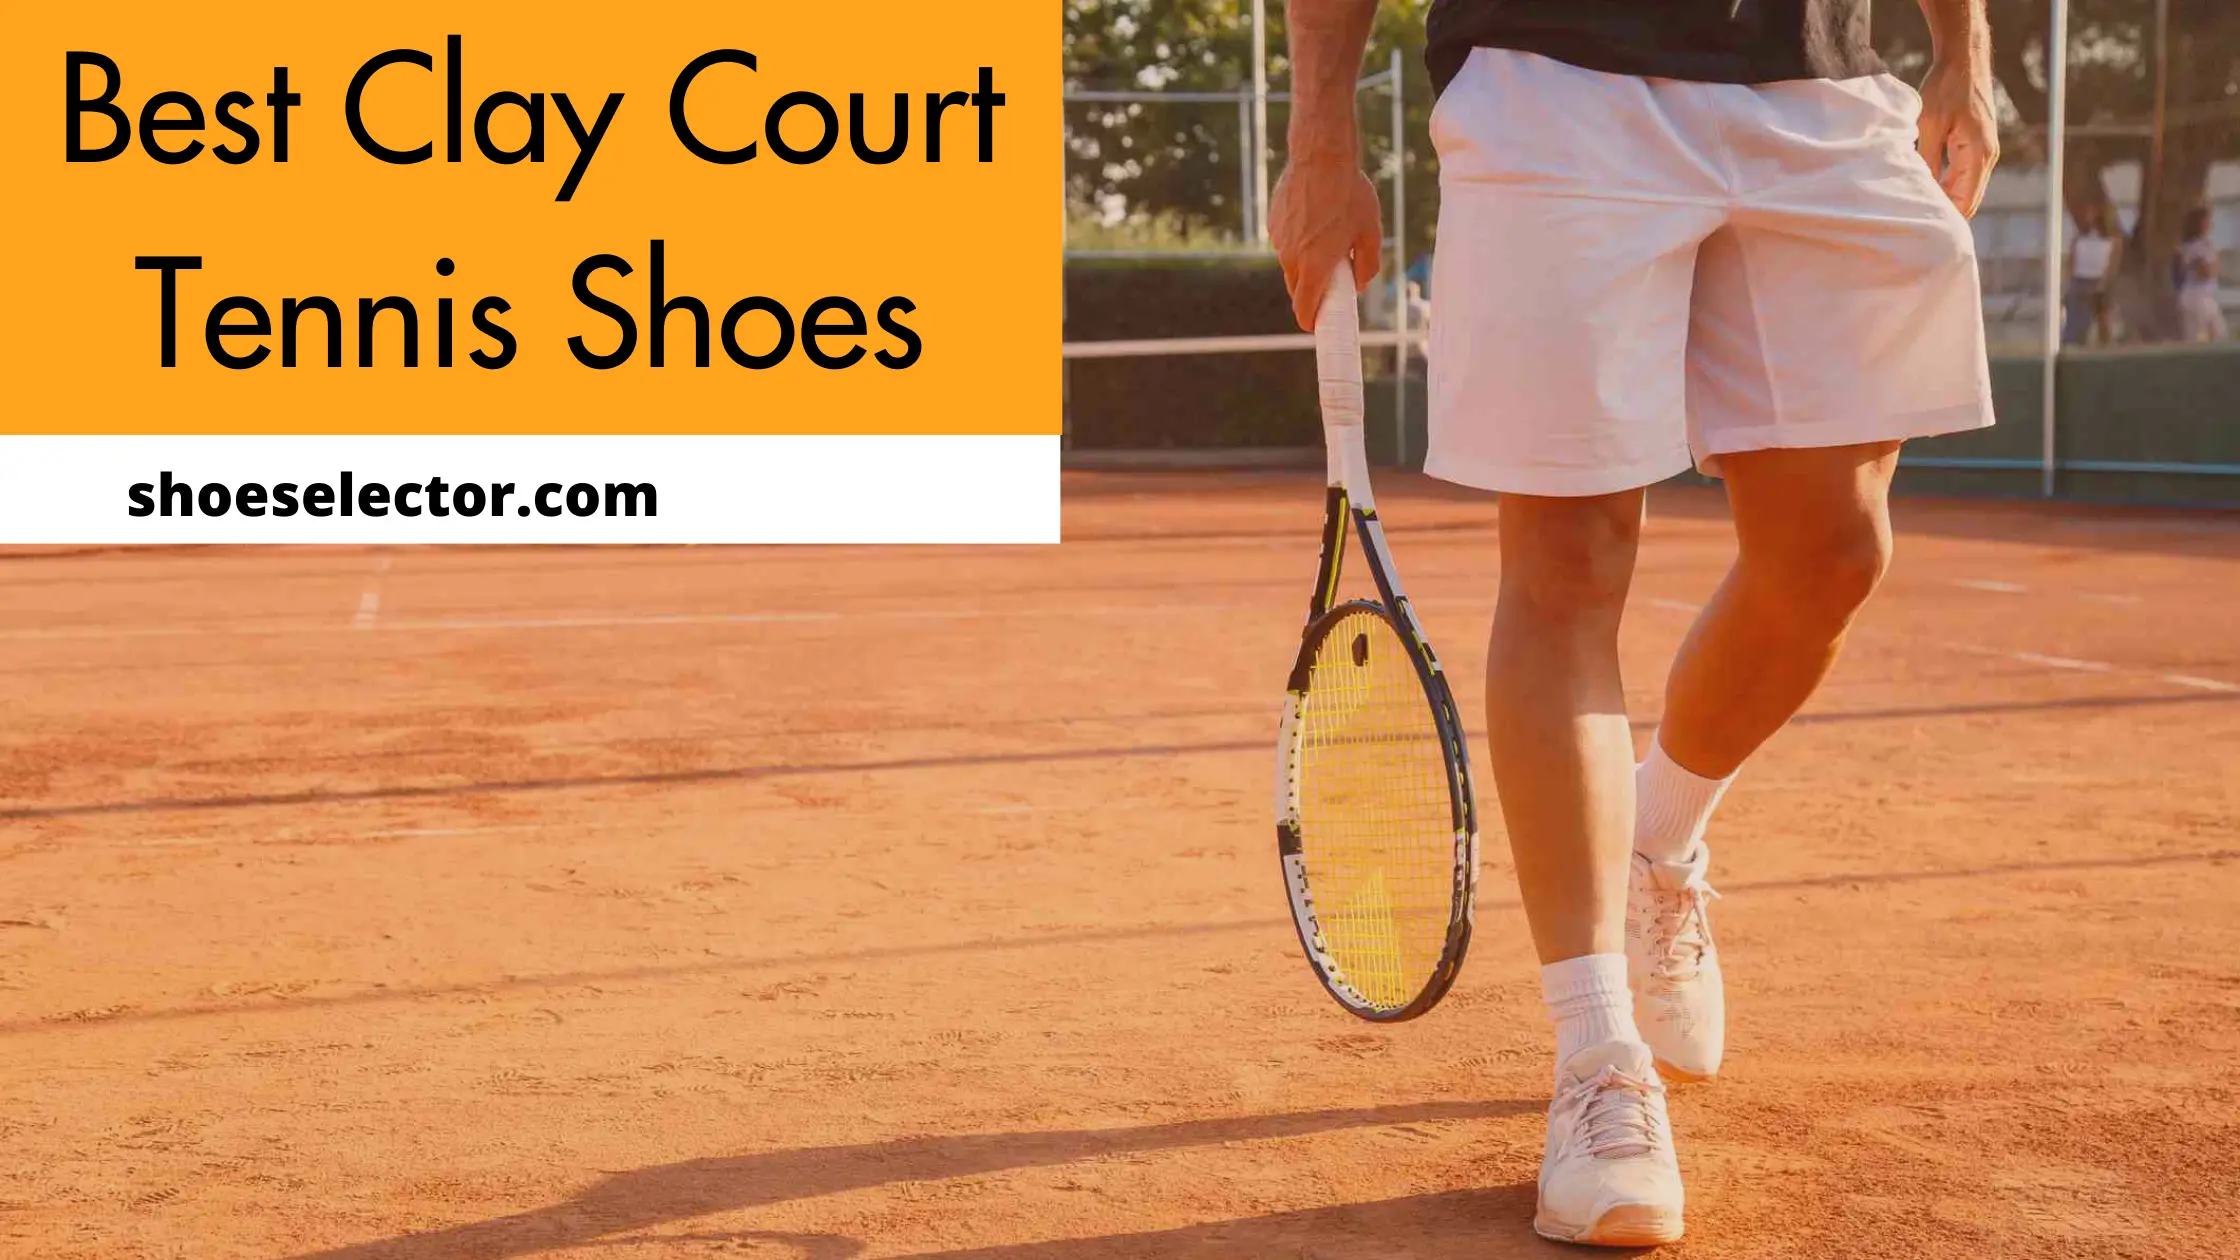 Best Clay Court Tennis Shoes - Comprehensive Guide